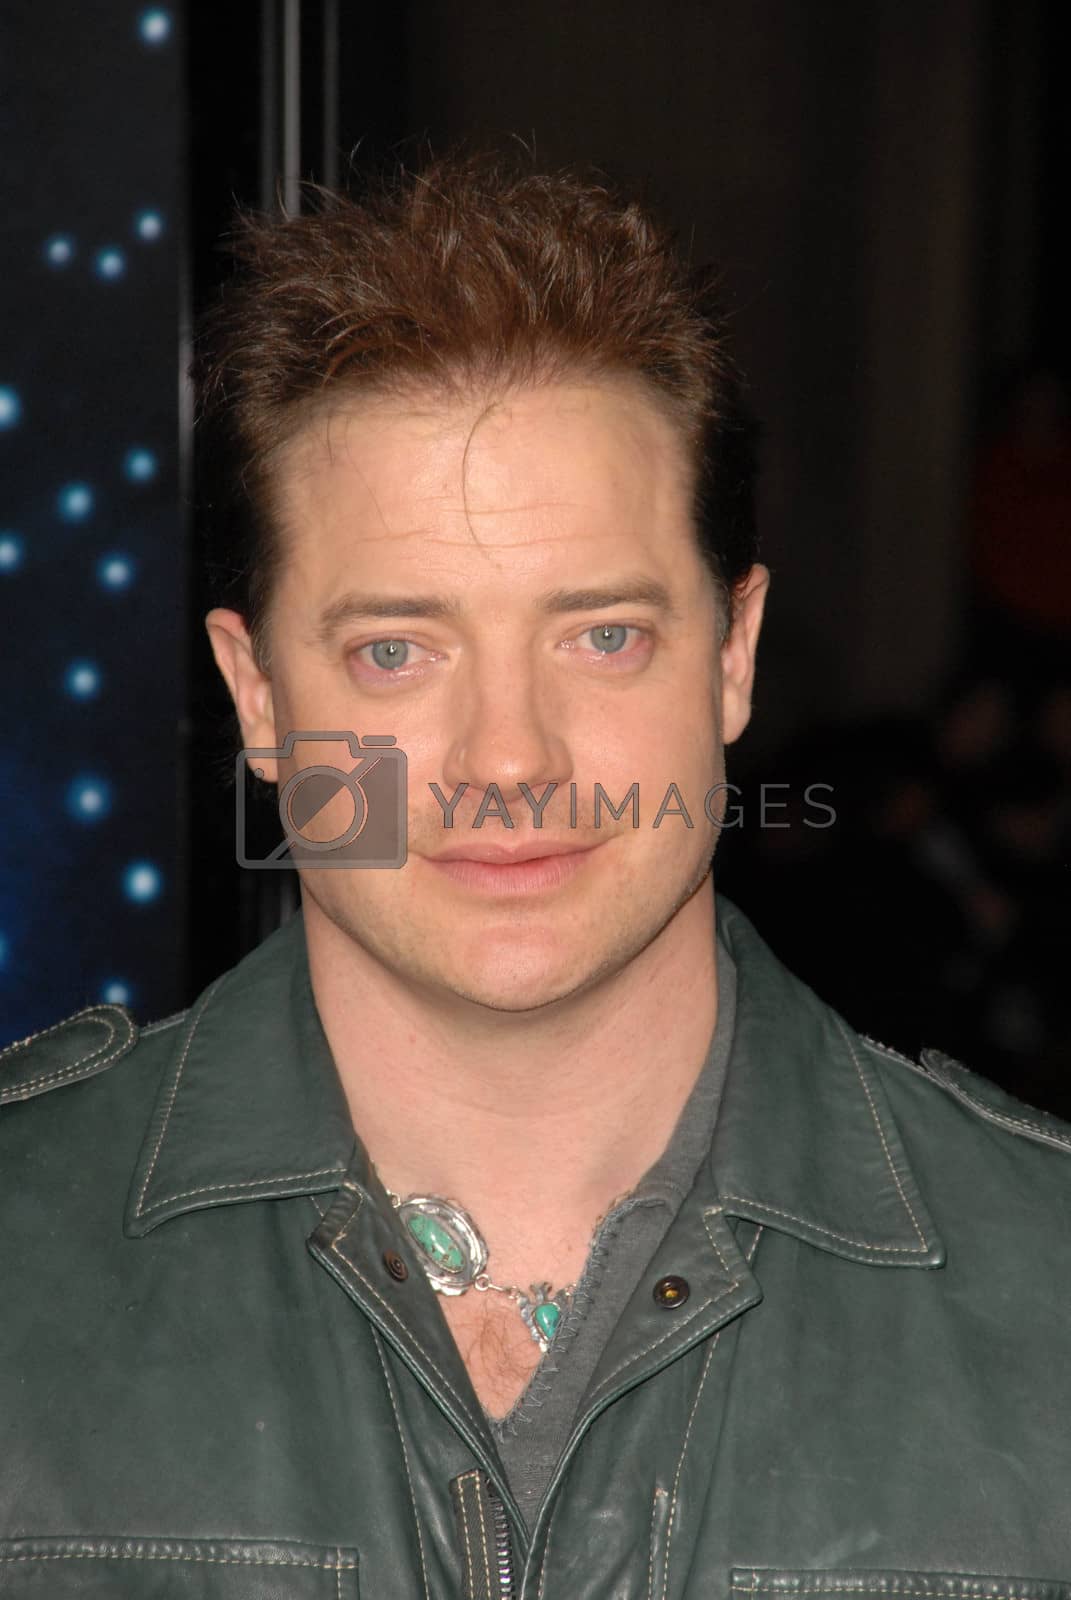 Royalty free image of Brendan Fraser
/ImageCollect by ImageCollect